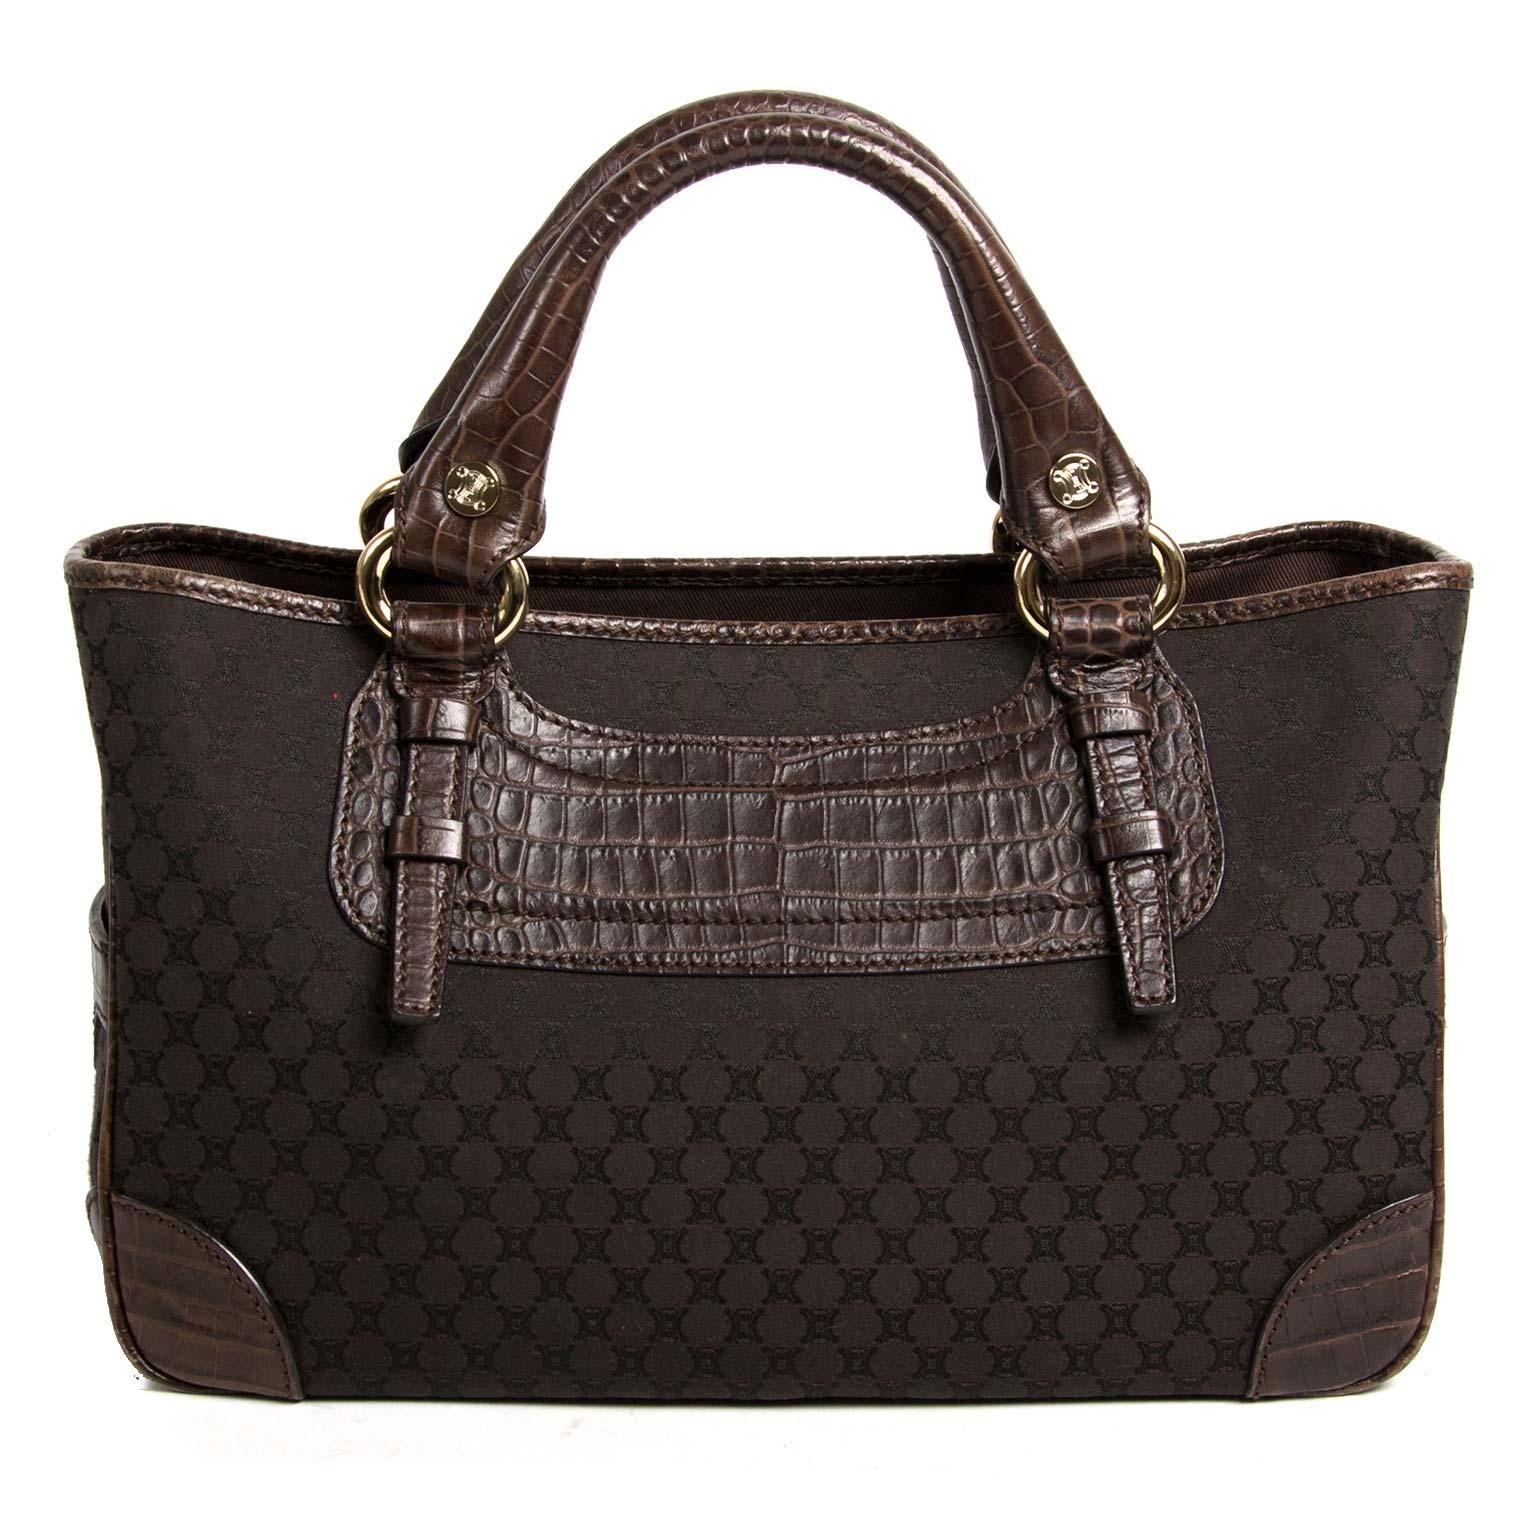 Very good condition

Céline Brown Monogram Boogie Bag

This gorgeous Céline bag is crafted in brown monogram fabric and features brown embossed croco details. It has silver-tone hardware.
The bag has two rolled leather handles, perfect to wear in